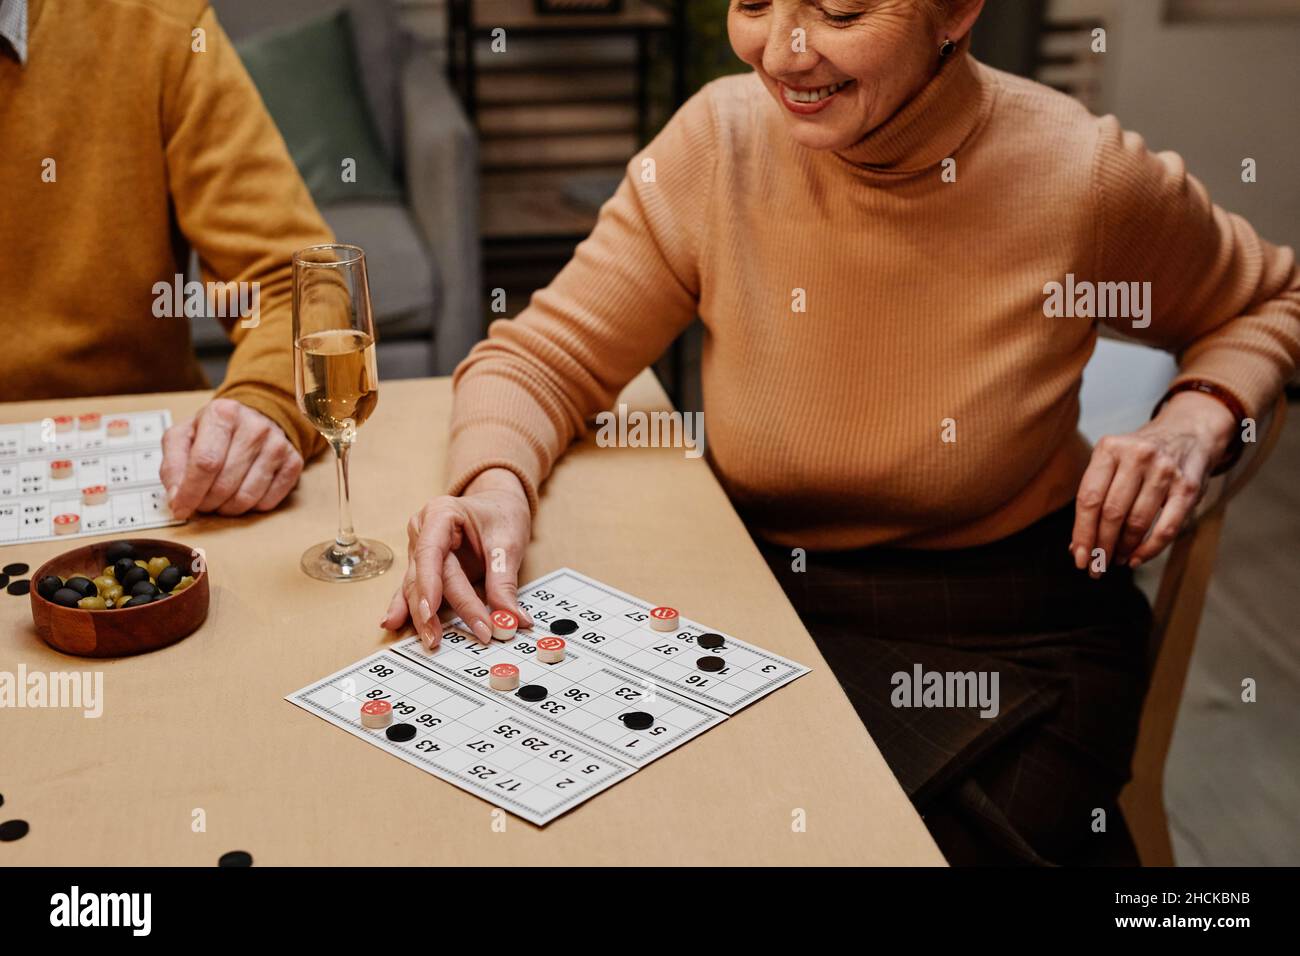 Beautiful aged Caucasian woman wearing casual clothes sitting at wooden table with snack and drinks and playing board game with friends Stock Photo